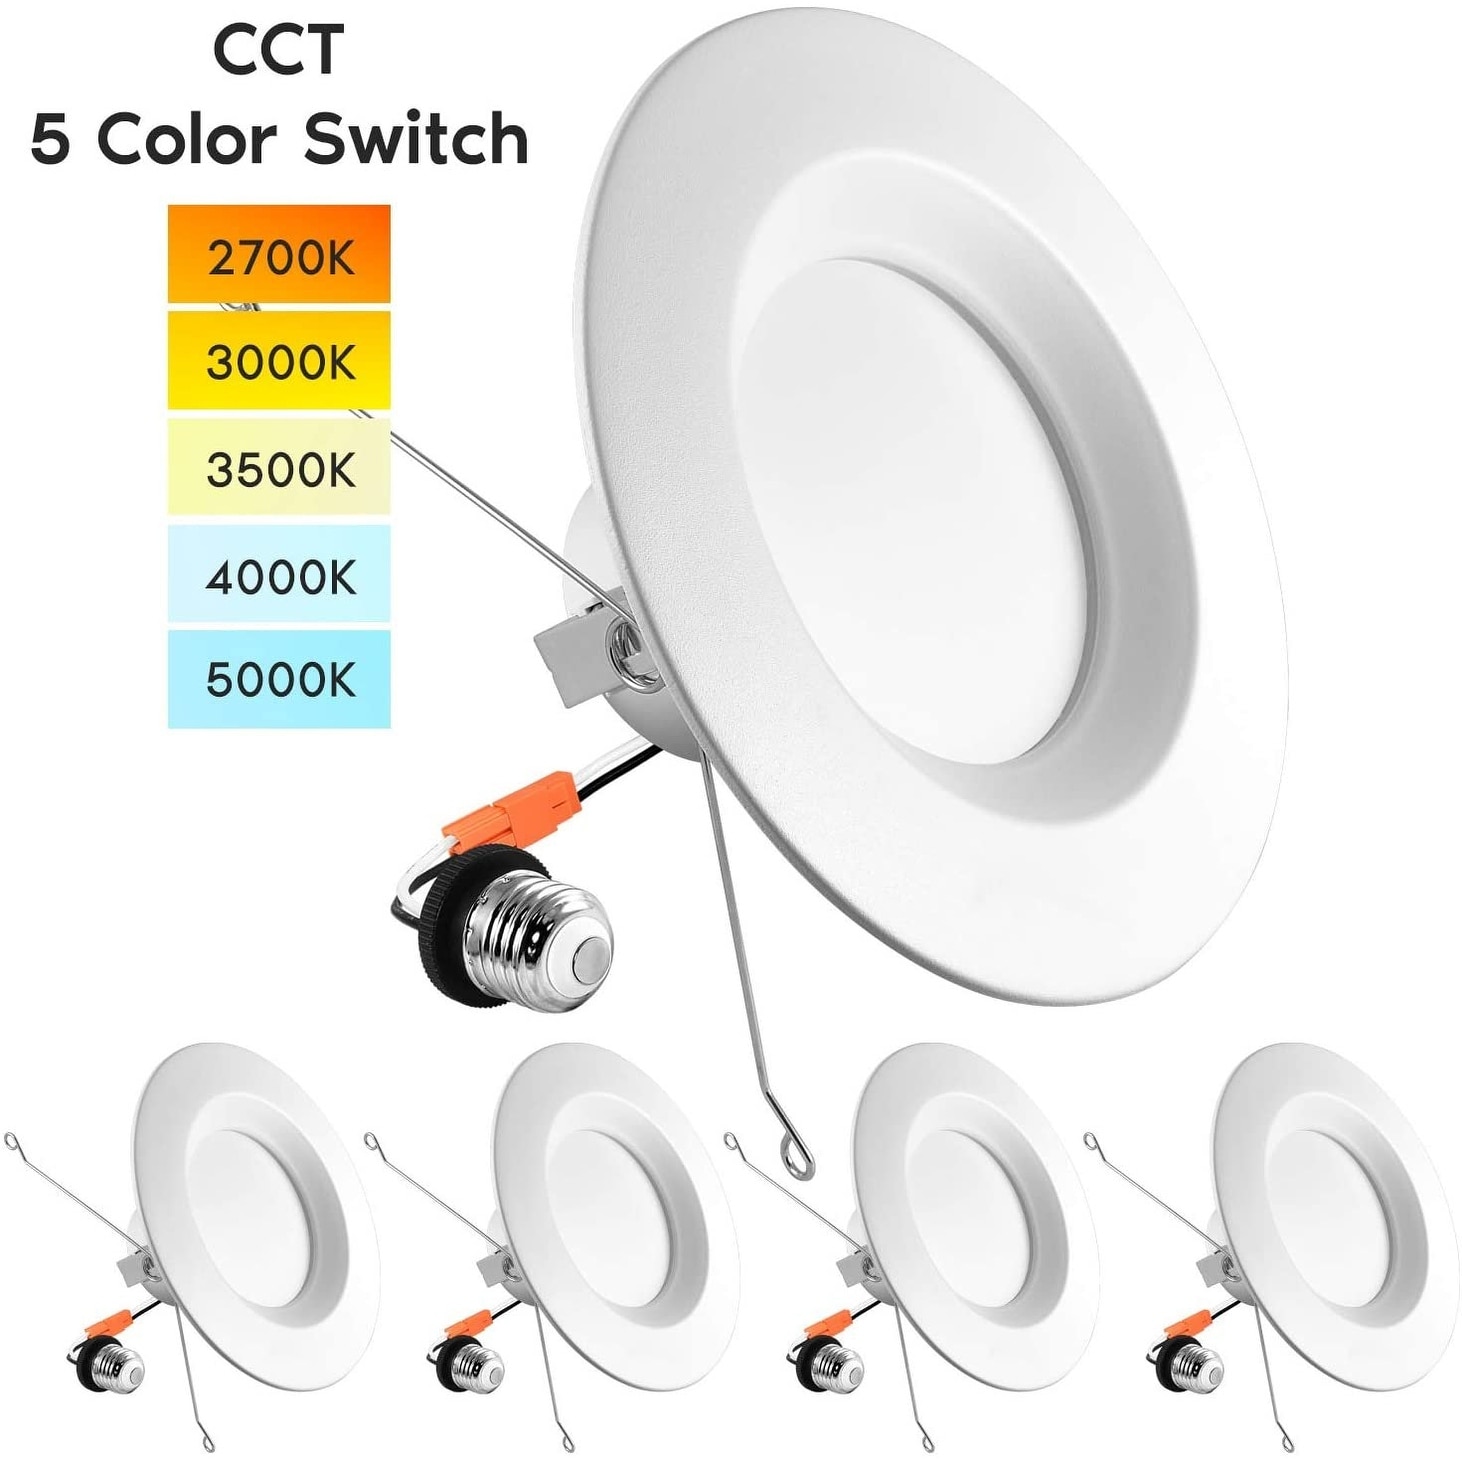 Energy Star & ETL 15W 1100lm 120W Replacement LED Ceiling Down Light 5000K Parmida 1100Lm 5/6 inch Dimmable LED Recessed Retrofit Downlight Easy Installation 4 Pack Day Light LED Trim 